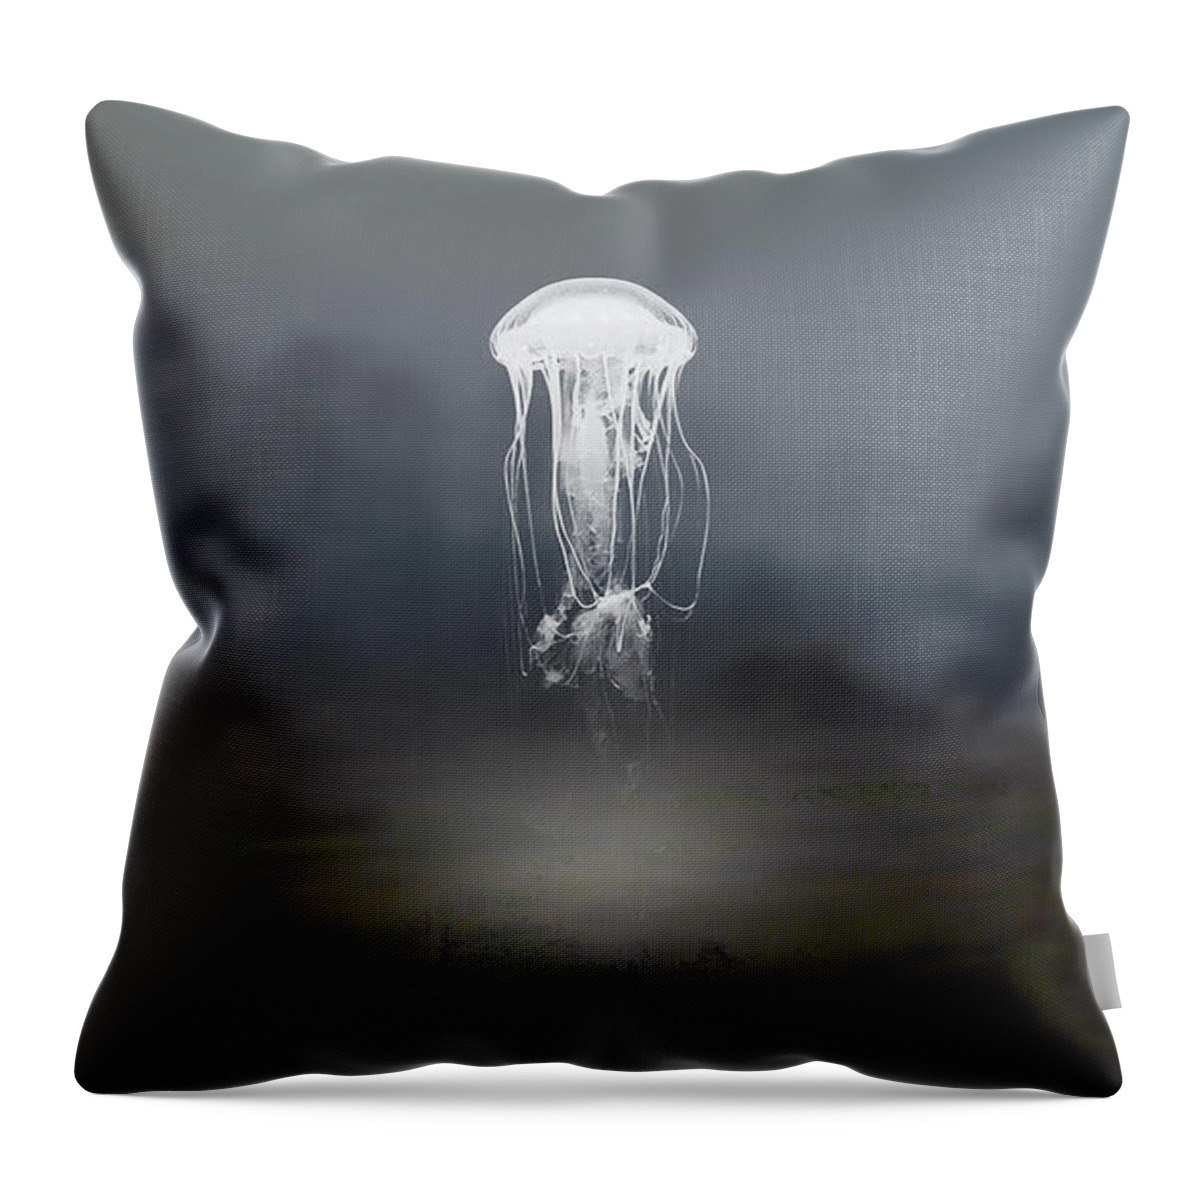 Jellyfish Throw Pillow featuring the mixed media Jellyfish Dream by Marvin Blaine